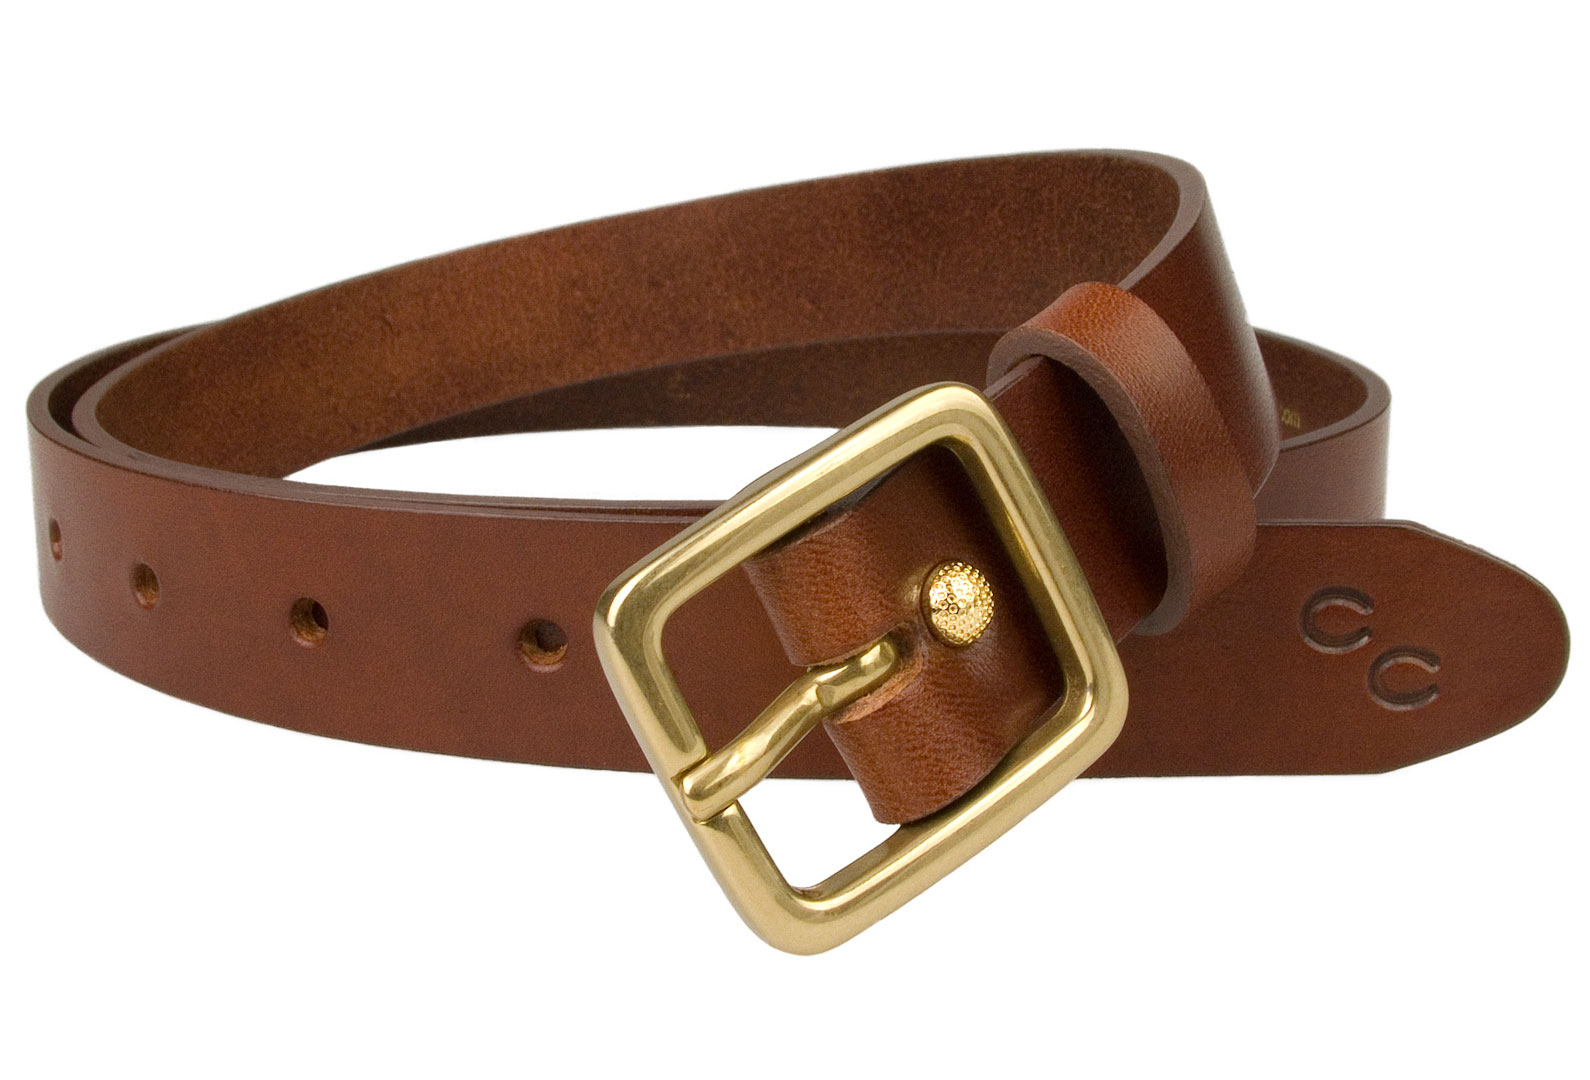 Champion Chase ™ Leather Belt Light Chestnut 1 Inch Wide. High quality womens leather belt. Italian vegetable tanned leather and solid brass buckle. Made in UK by British Craftsmen. Free sliding loop to ensure a flush finish when worn with dresses or loose top. However this belt looks super with smart or casual trousers. Comes with the Champion Chase™ double horse shoe motif.